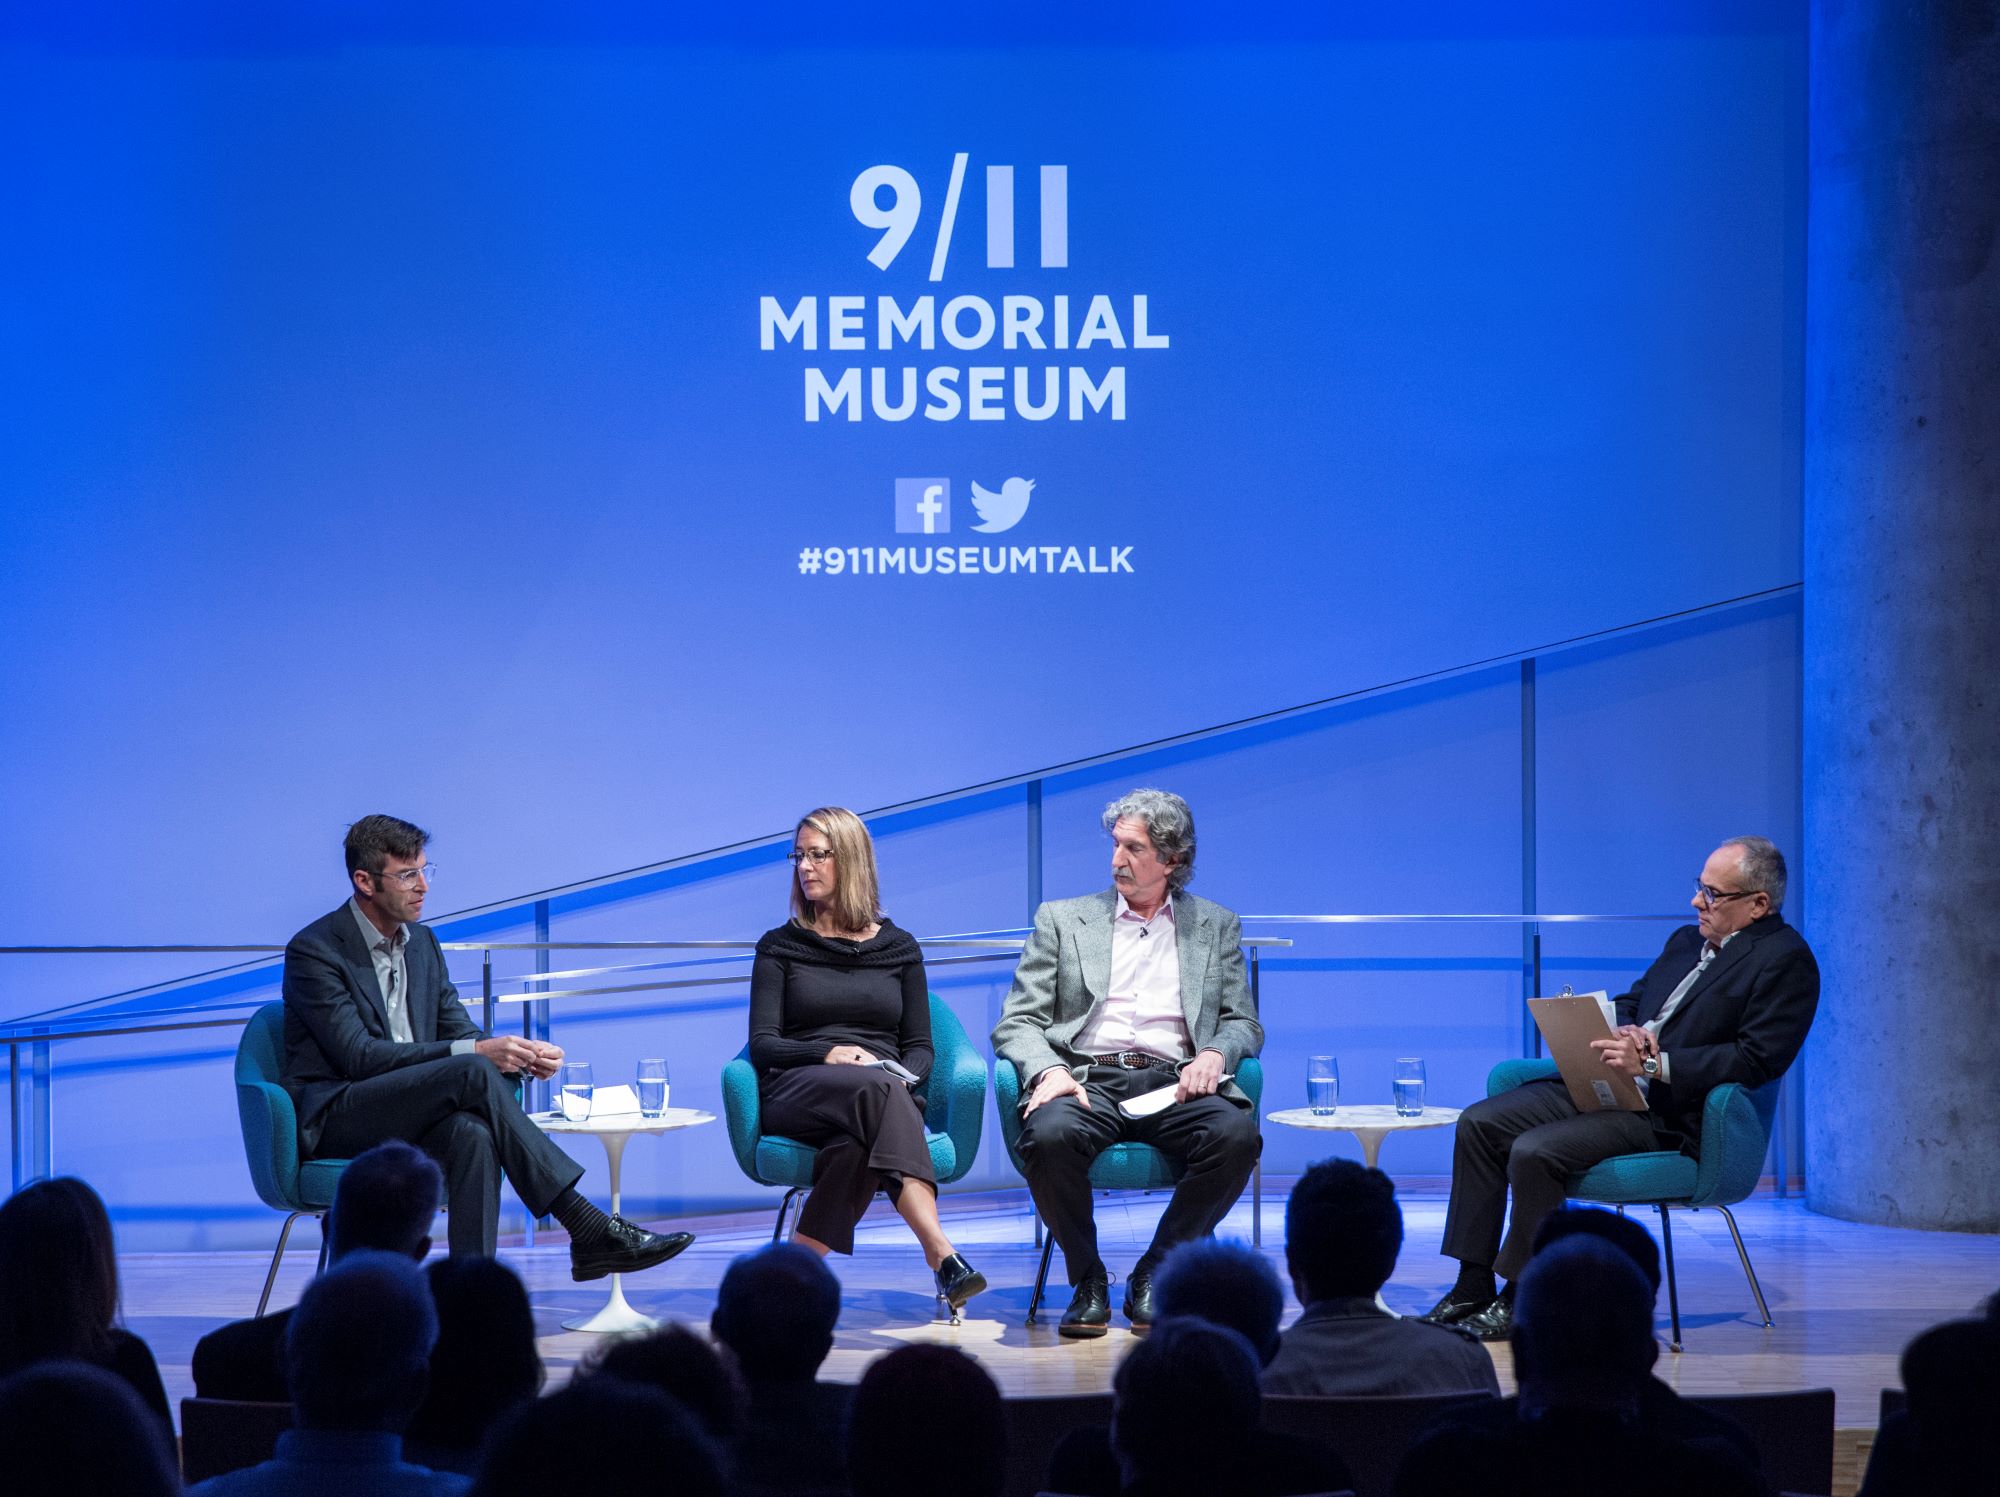 Handel Architects LLP partner Michael Arad, Paul Murdoch Architects President Paul Murdoch, and KBAS partner Julie Beckman are onstage as they take part in the public program, The Architecture of Remembrance. Clifford Chanin, the executive vice president and deputy director for museum programs, is seated to their left holding clipboard. The 9/11 Memorial & Museum logo is projected above the four of them. The silhouettes of audience members are in the foreground.